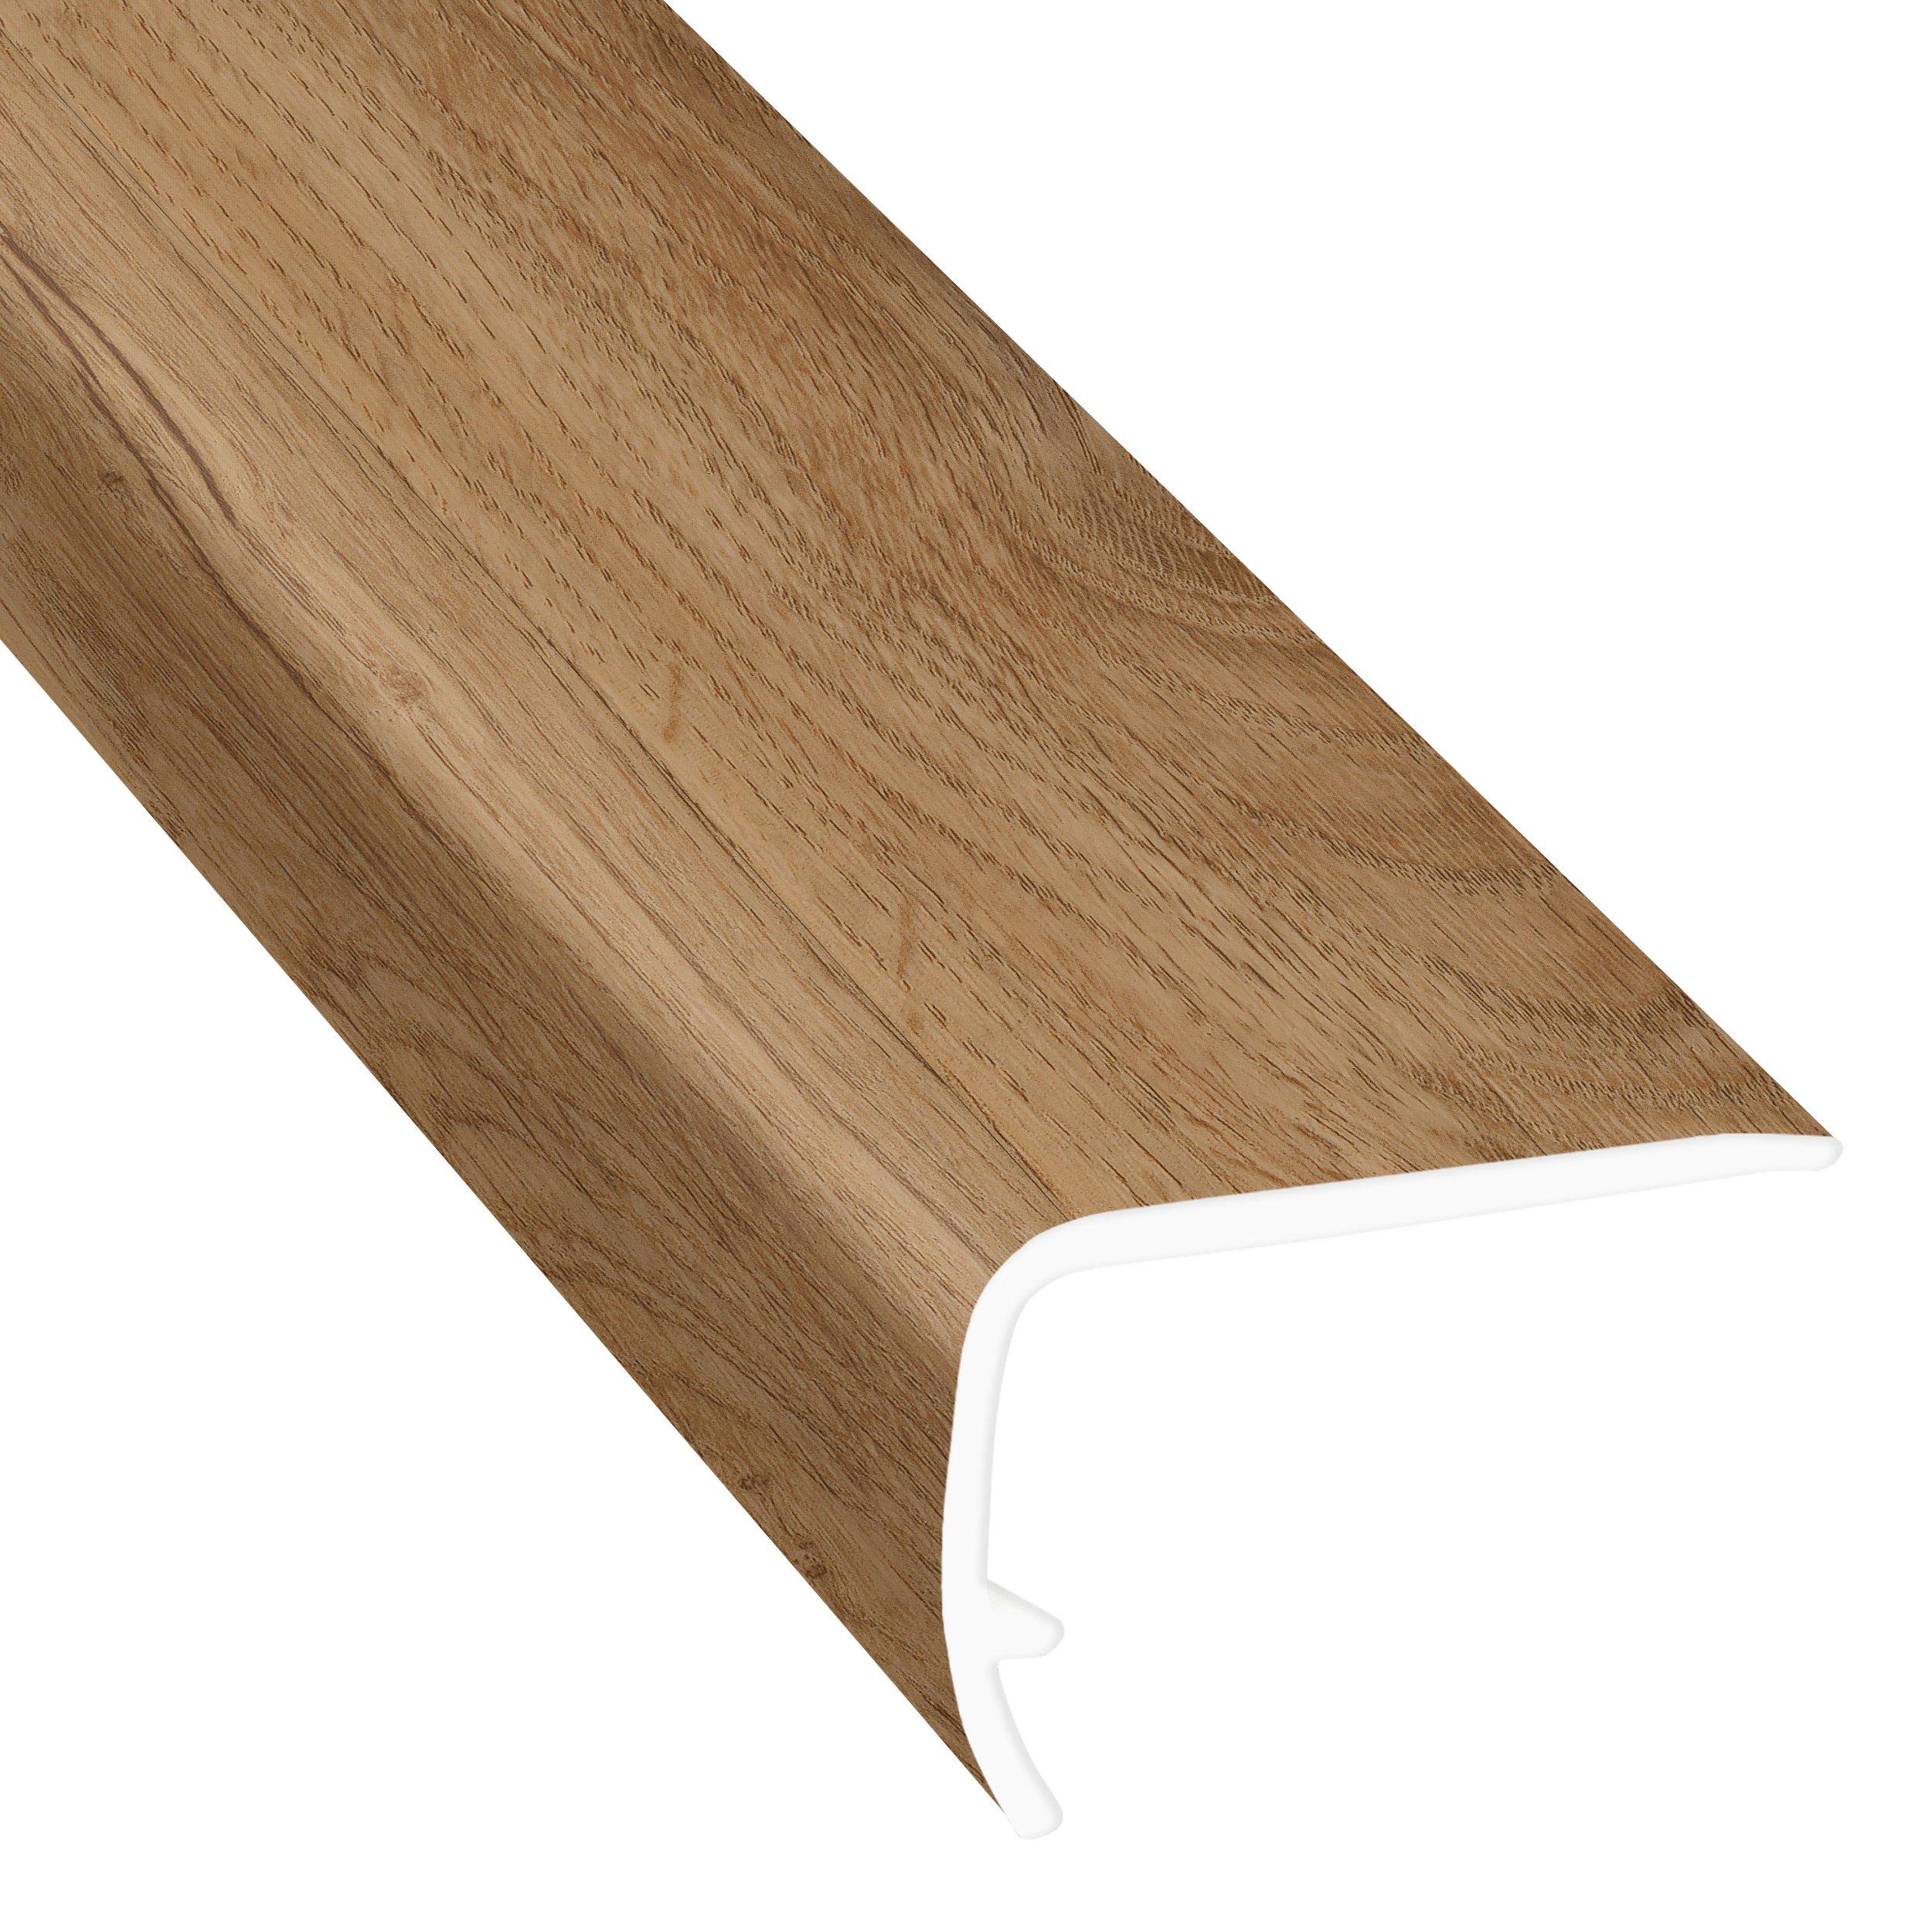 Signature Hickory 94in. Vinyl Overlapping Stair Nose